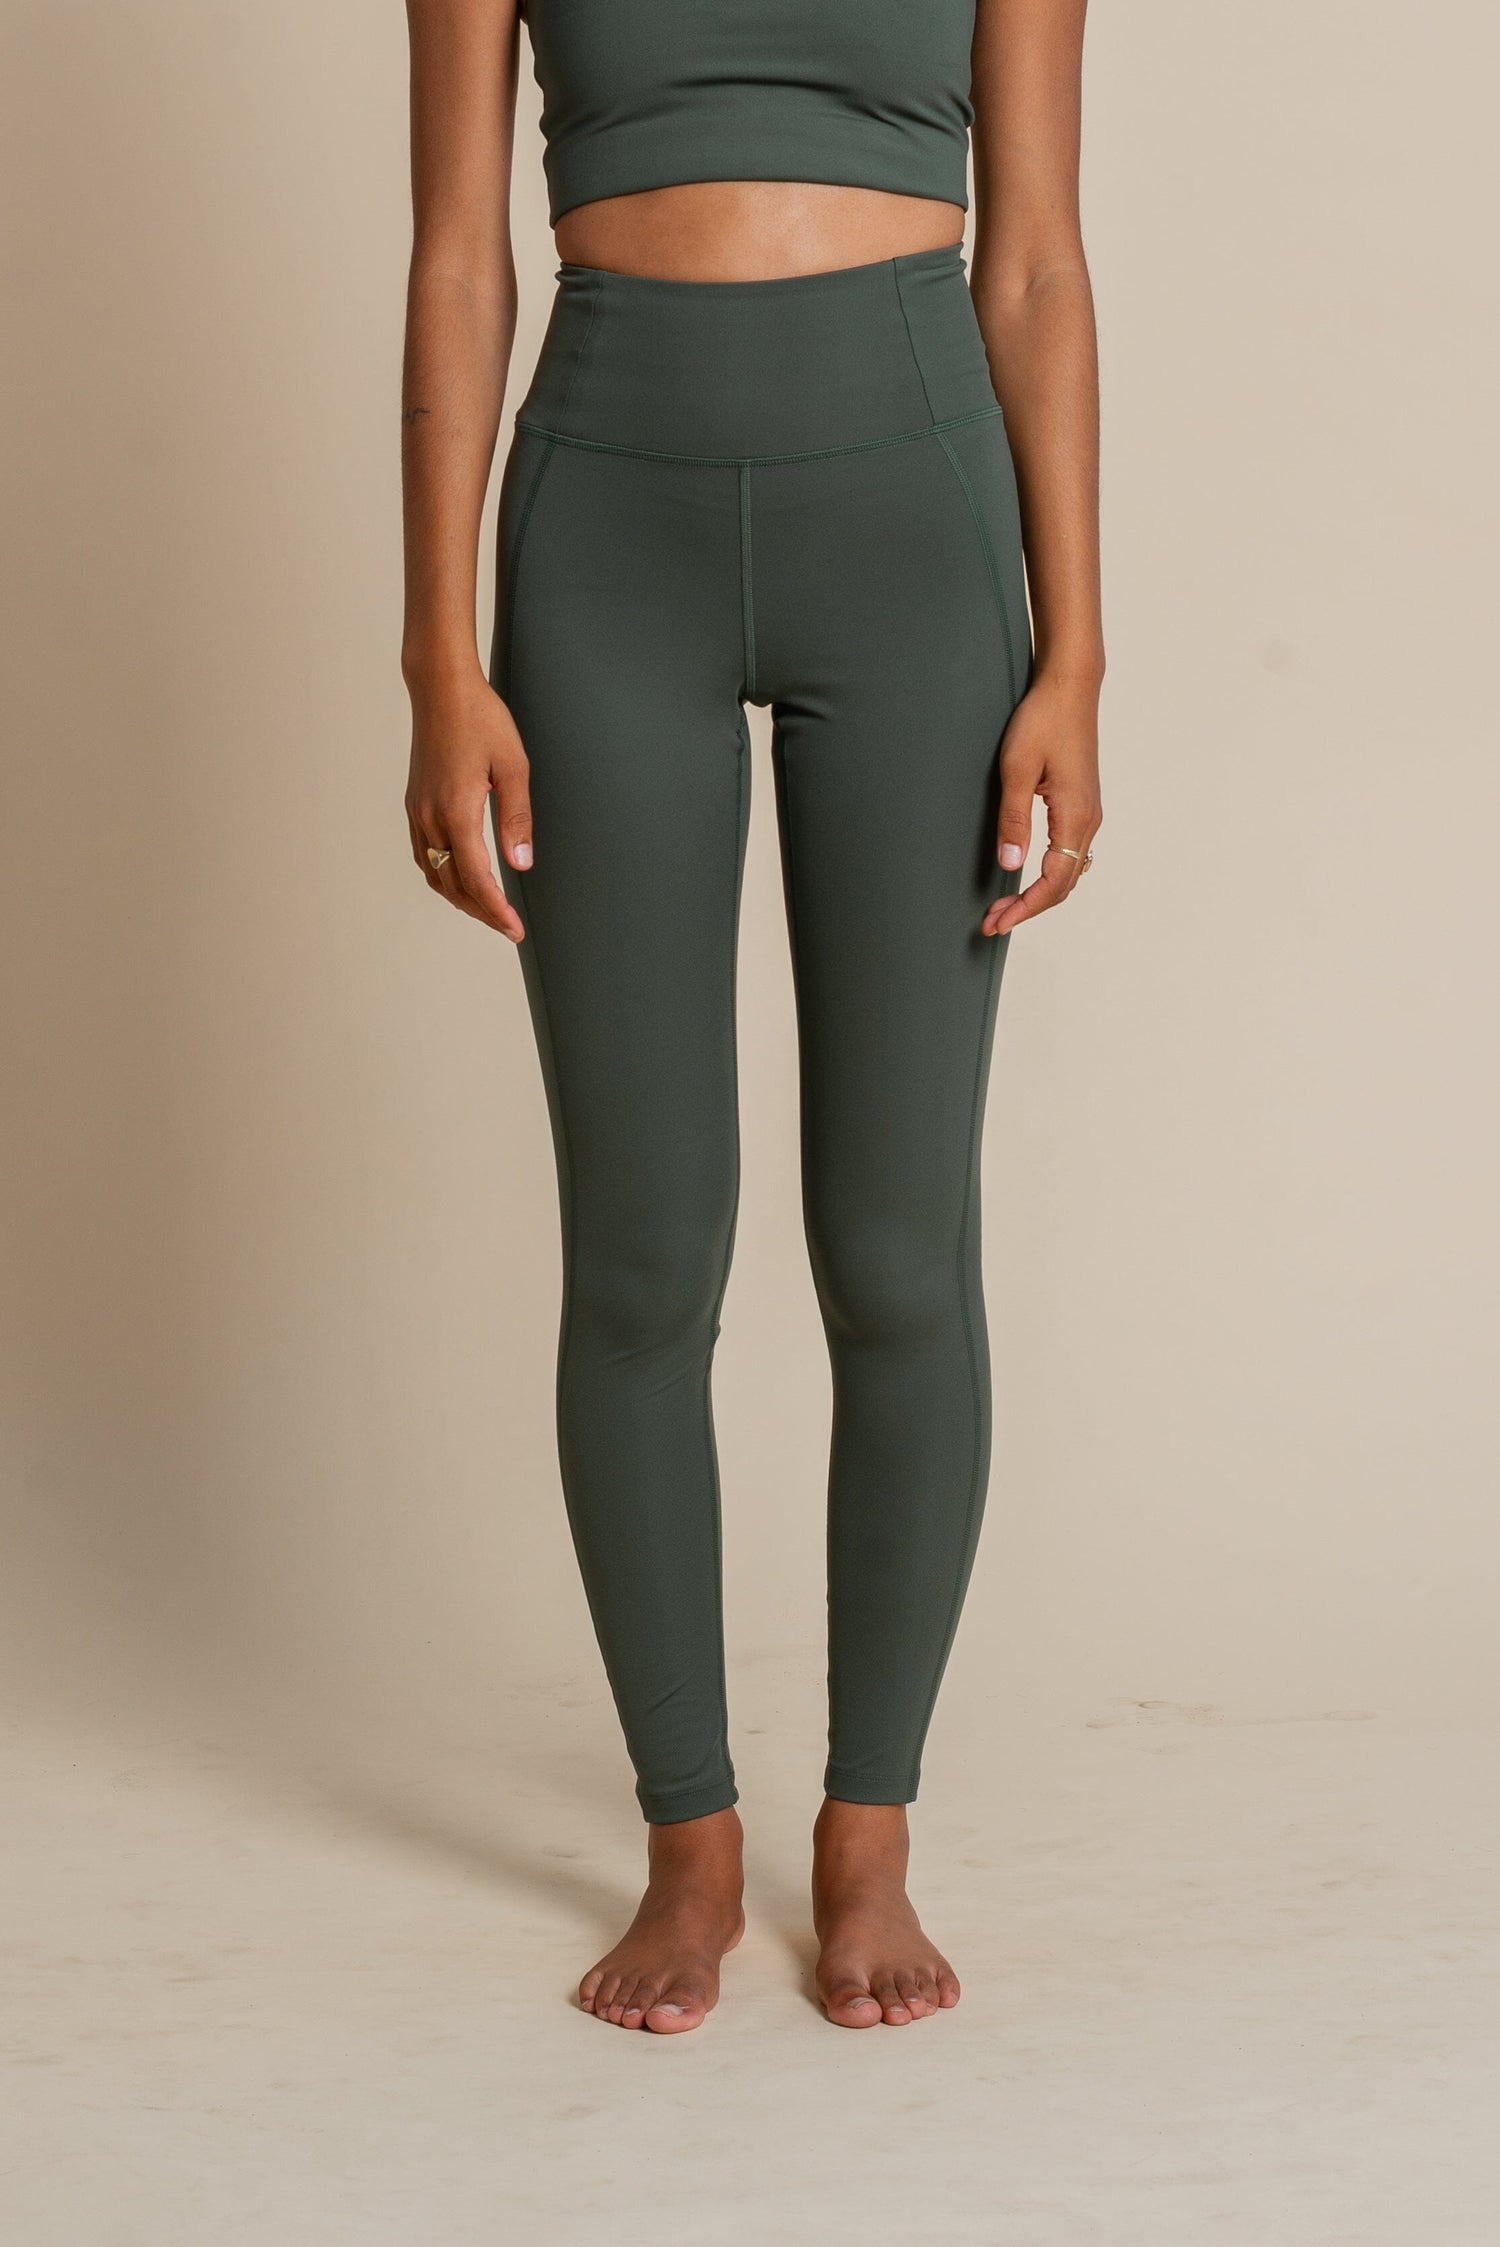 Girlfriend Collective - W's Compressive Legging - Limited Colors - Made From Recycled Plastic Bottles - Weekendbee - sustainable sportswear